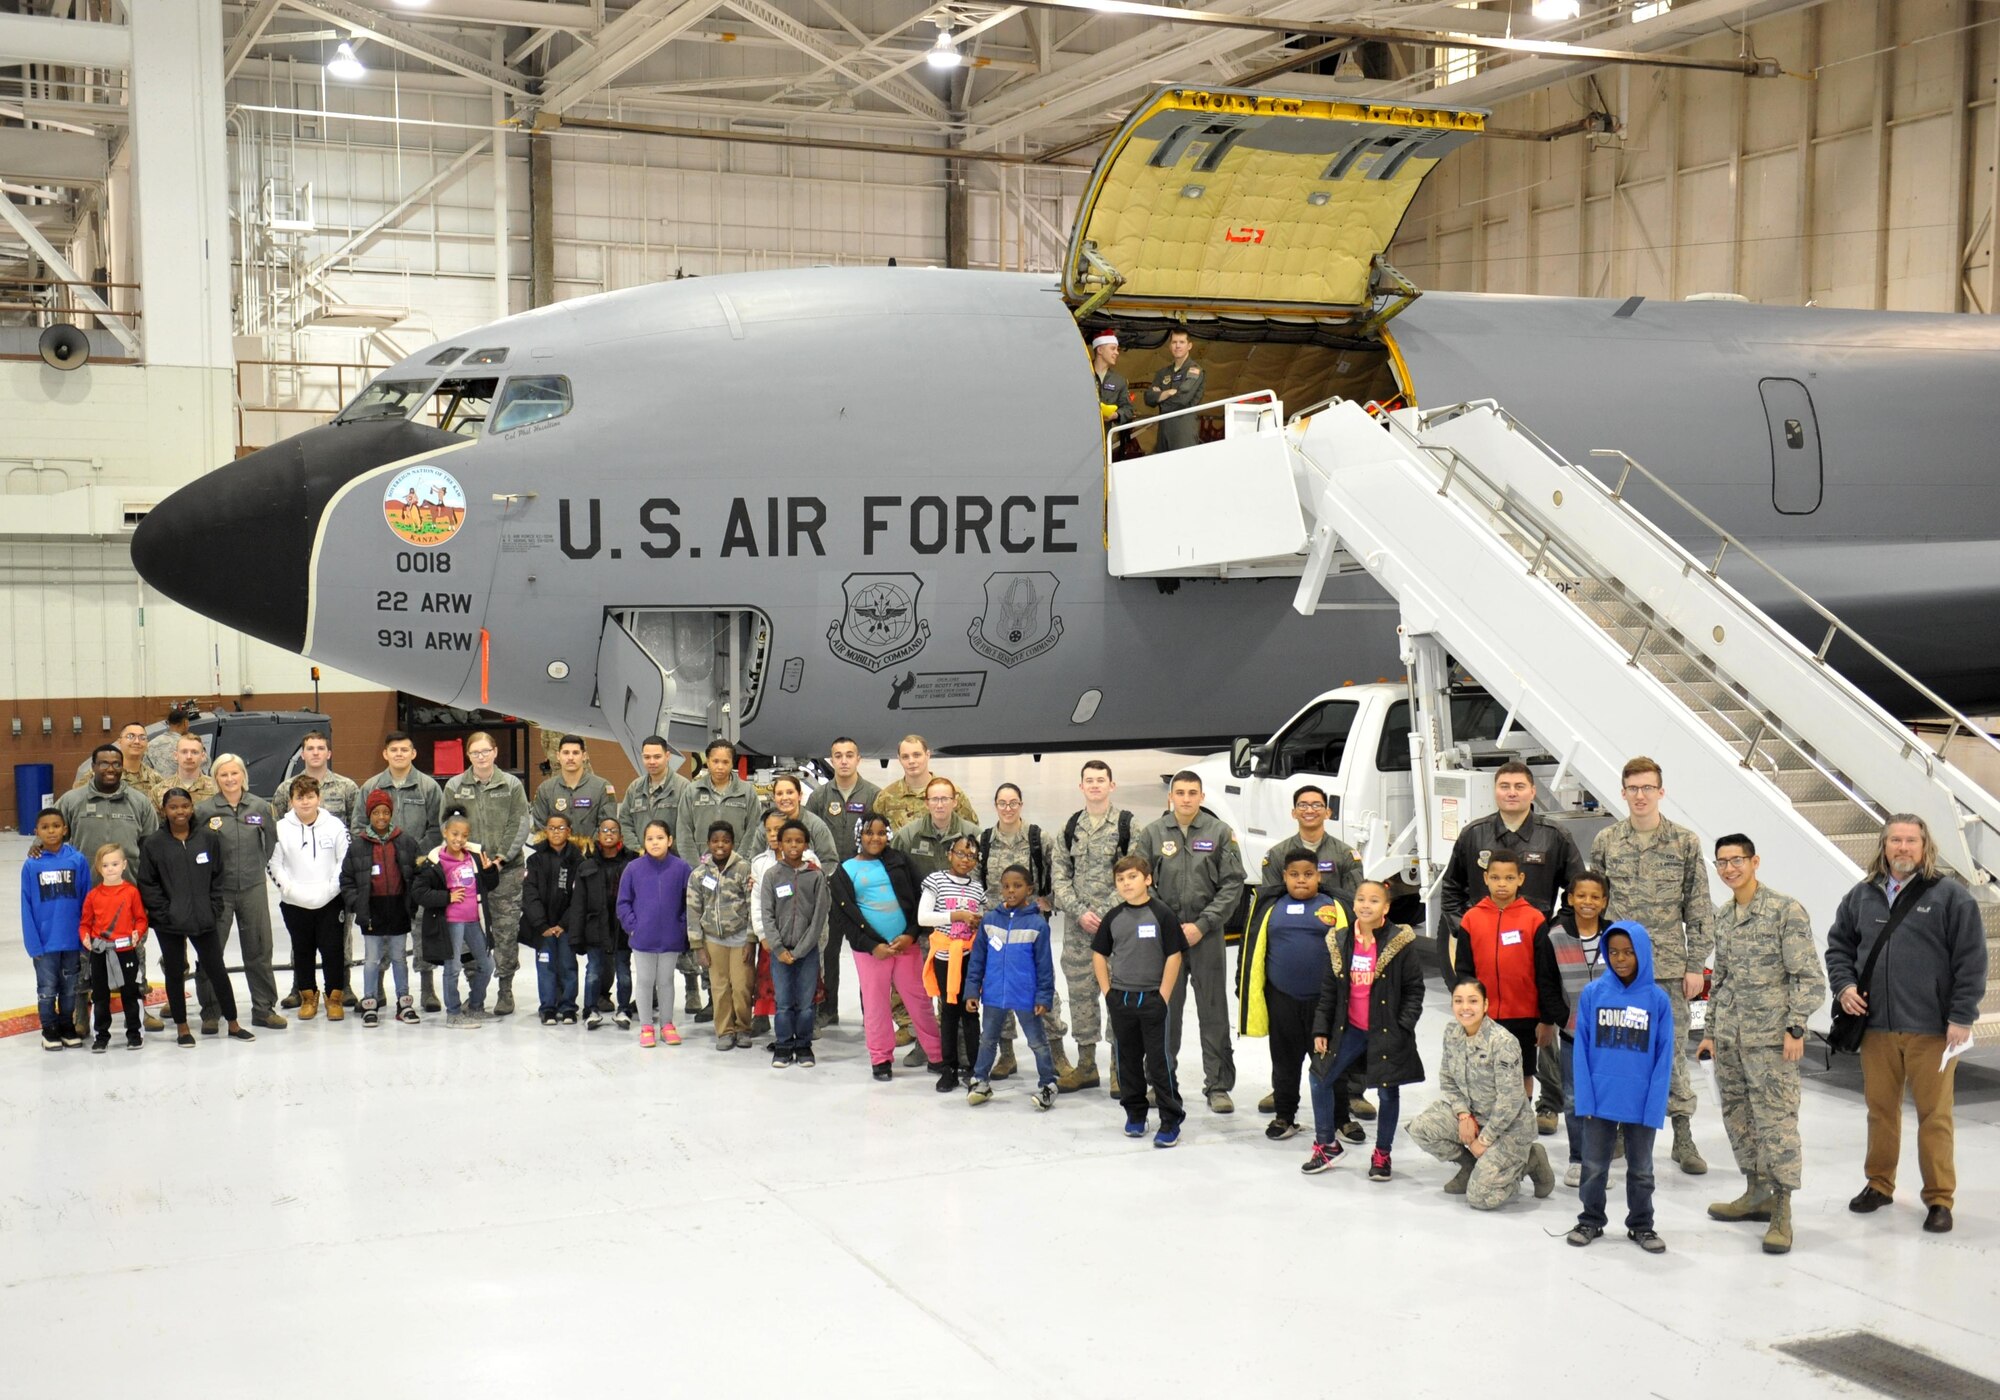 Airmen pose for a photo with children from Big Brothers Big Sisters Dec. 19, 2018, at McConnell Air Force Base, Kansas. Operation Santa brought children and Airmen together, where they toured static displays, build gingerbread houses and received little gifts. (U.S. Air Force photo by Staff Sgt. David Bernal Del Agua)